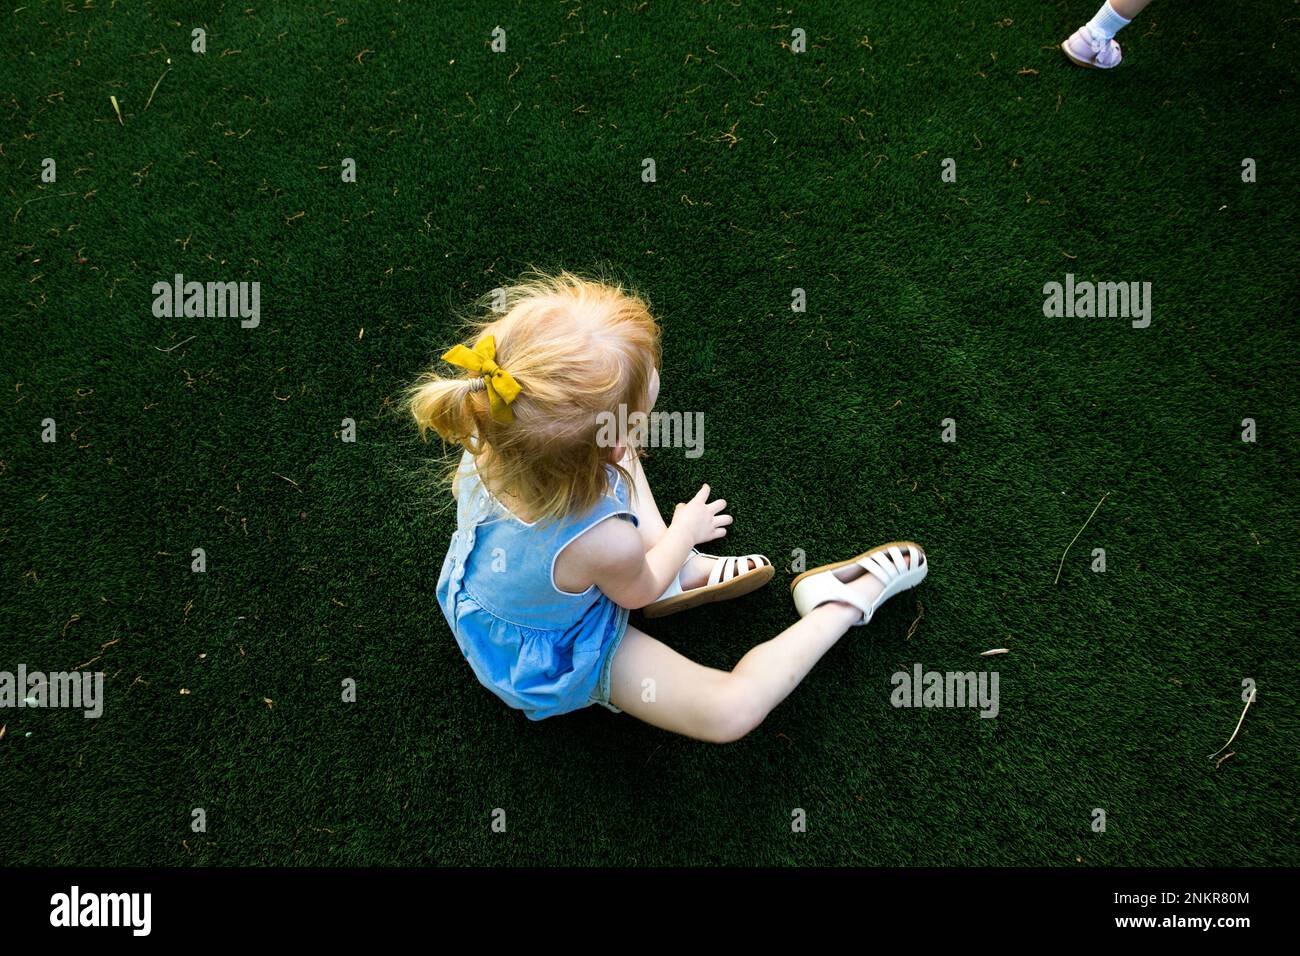 Overhead view of young girl sitting on grass wearing sandals Stock Photo